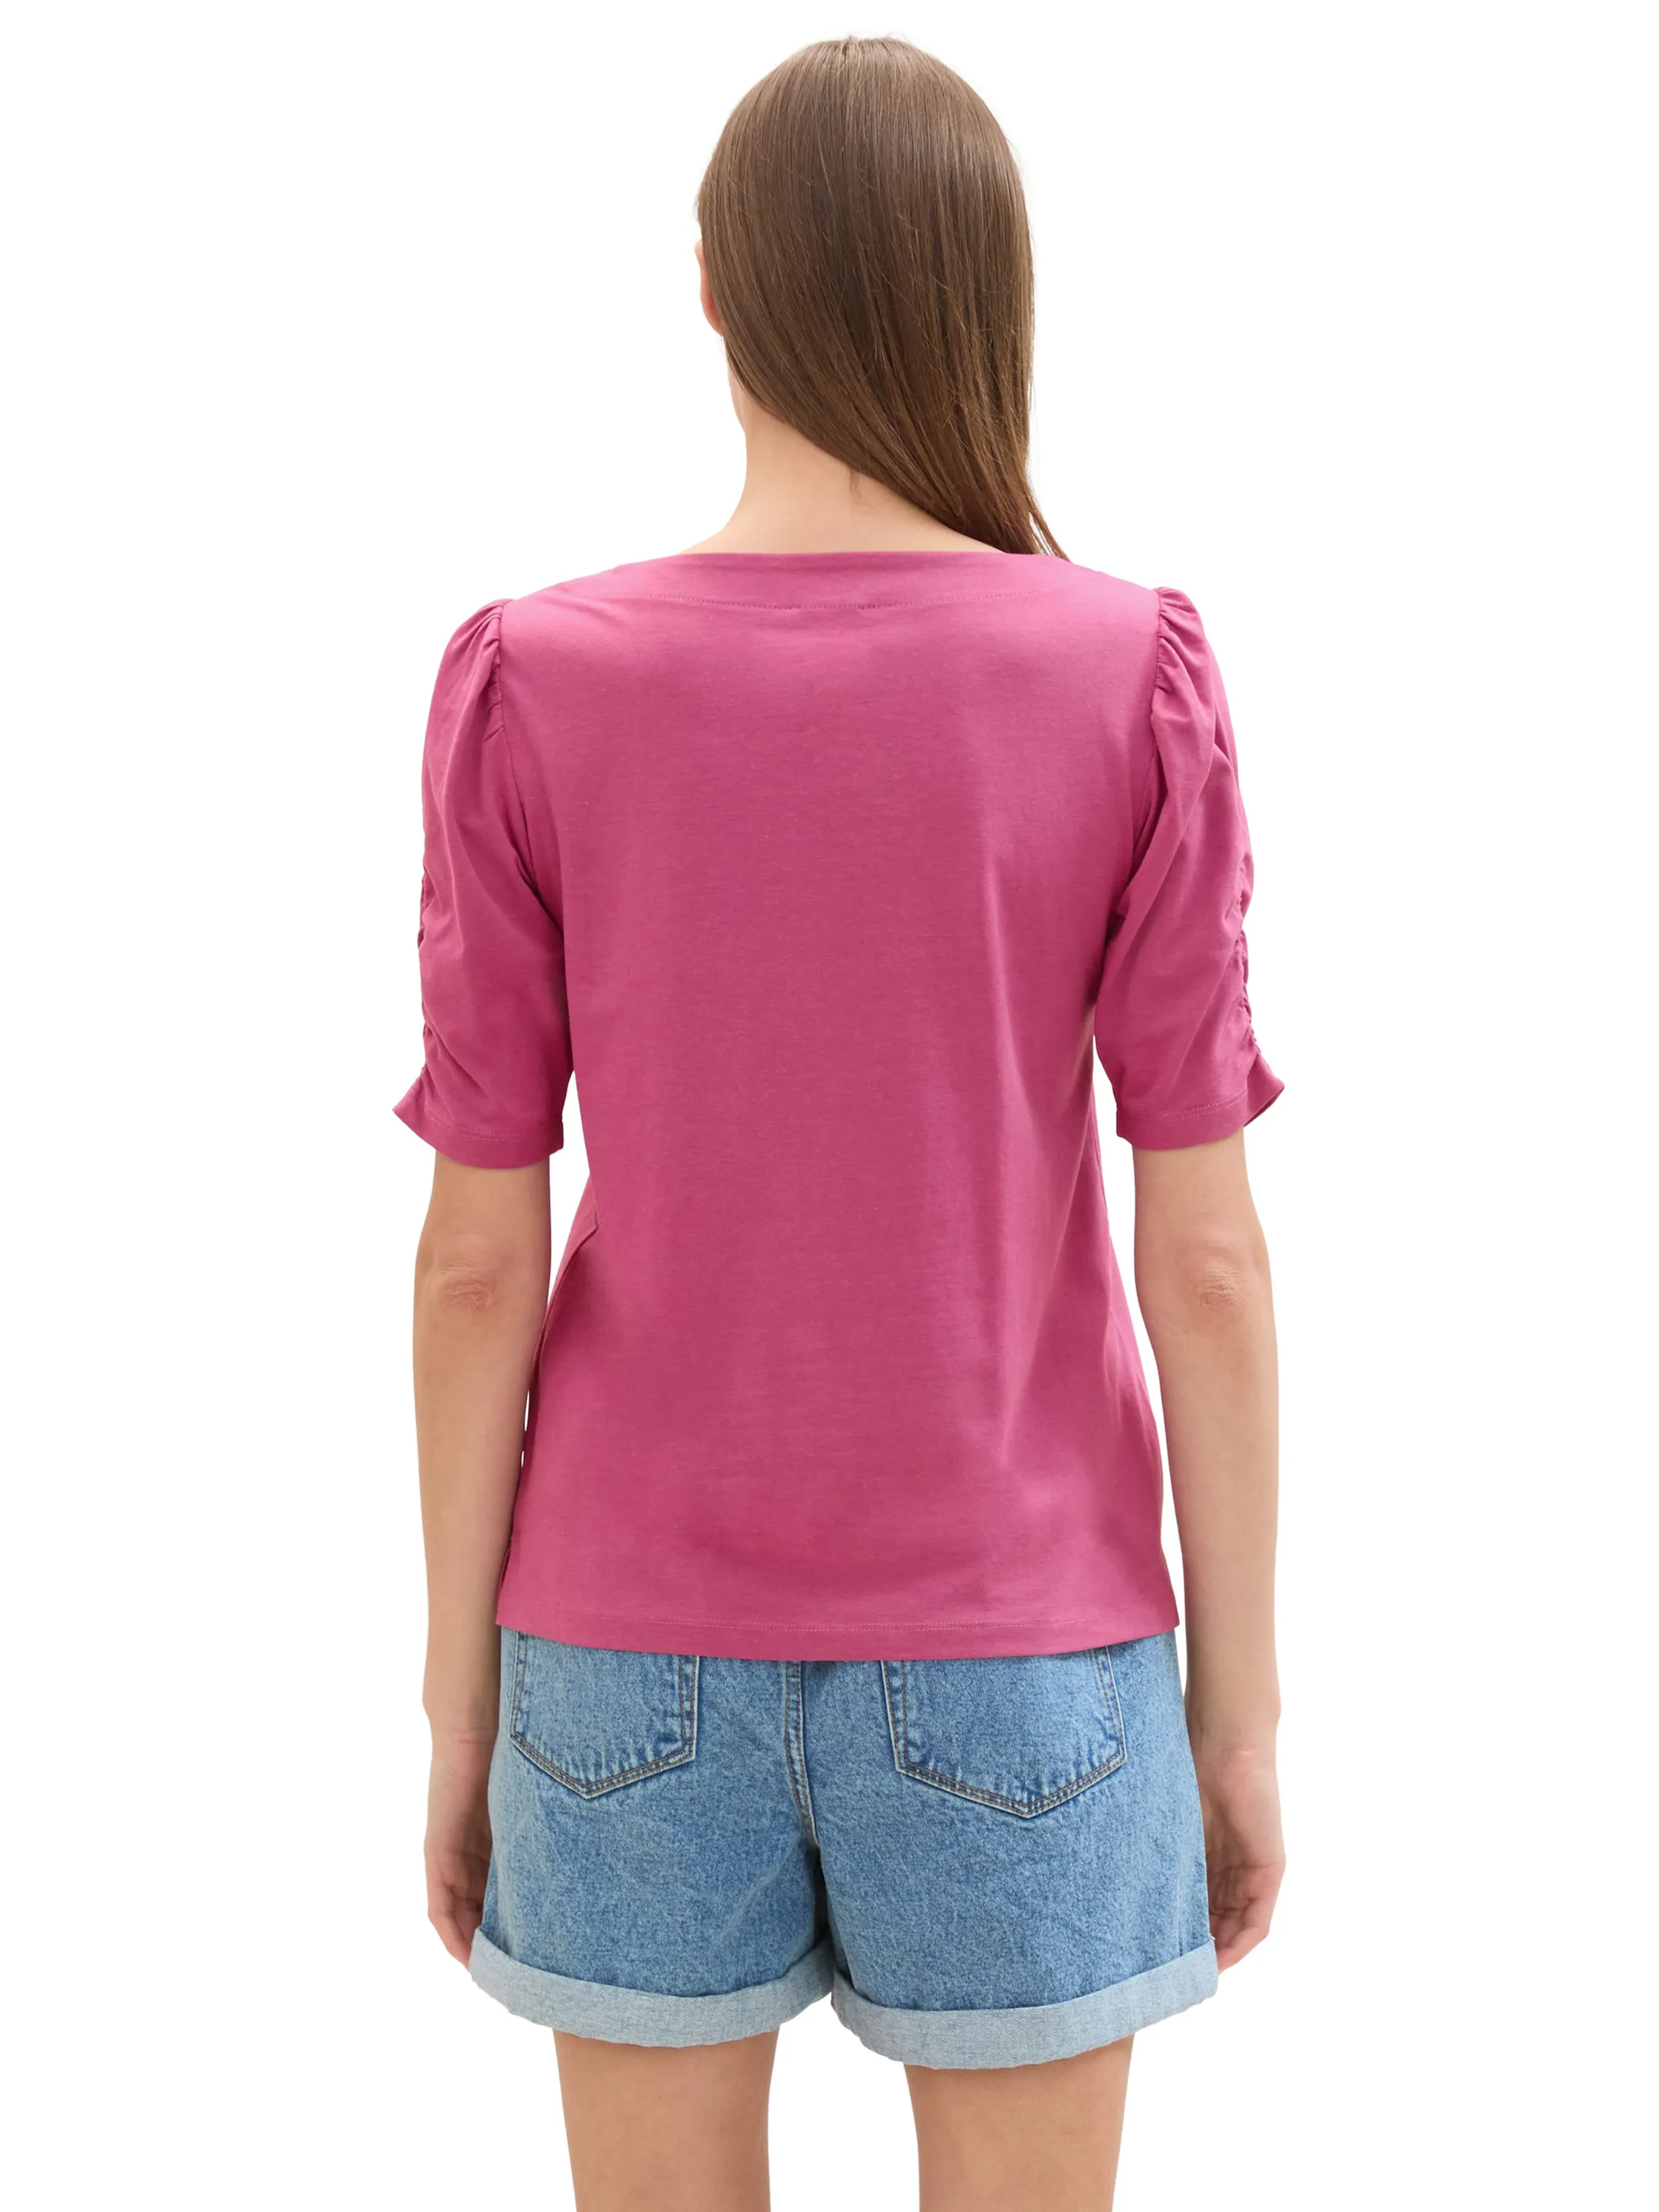 Tom Tailor 1041572 T-shirt gathered sleeve Pink 895787 35275 2